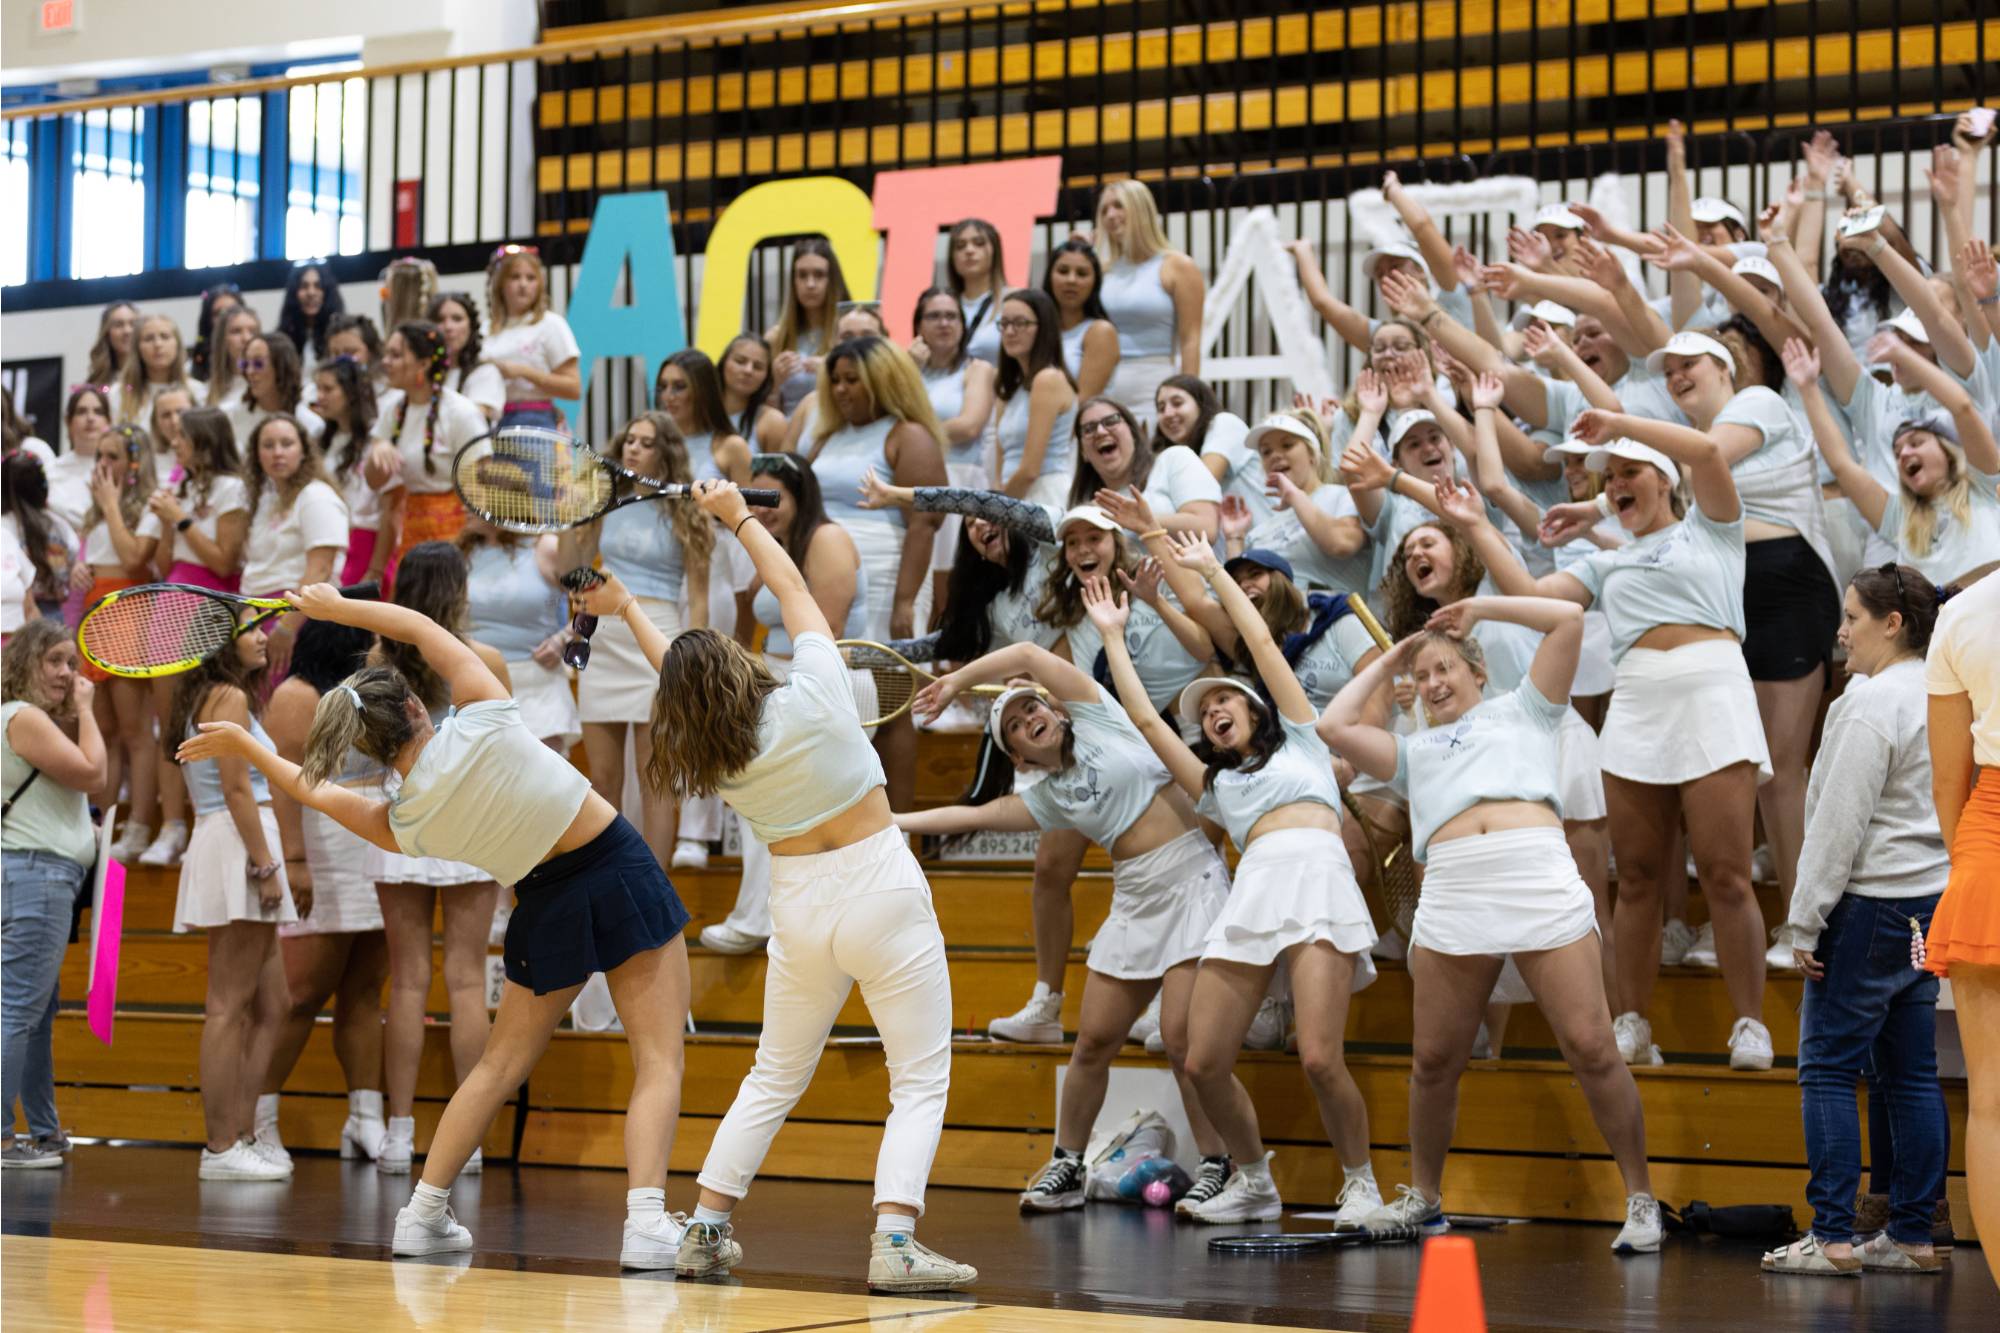 Students wave their hands in the air at Panhellenic Bid Day